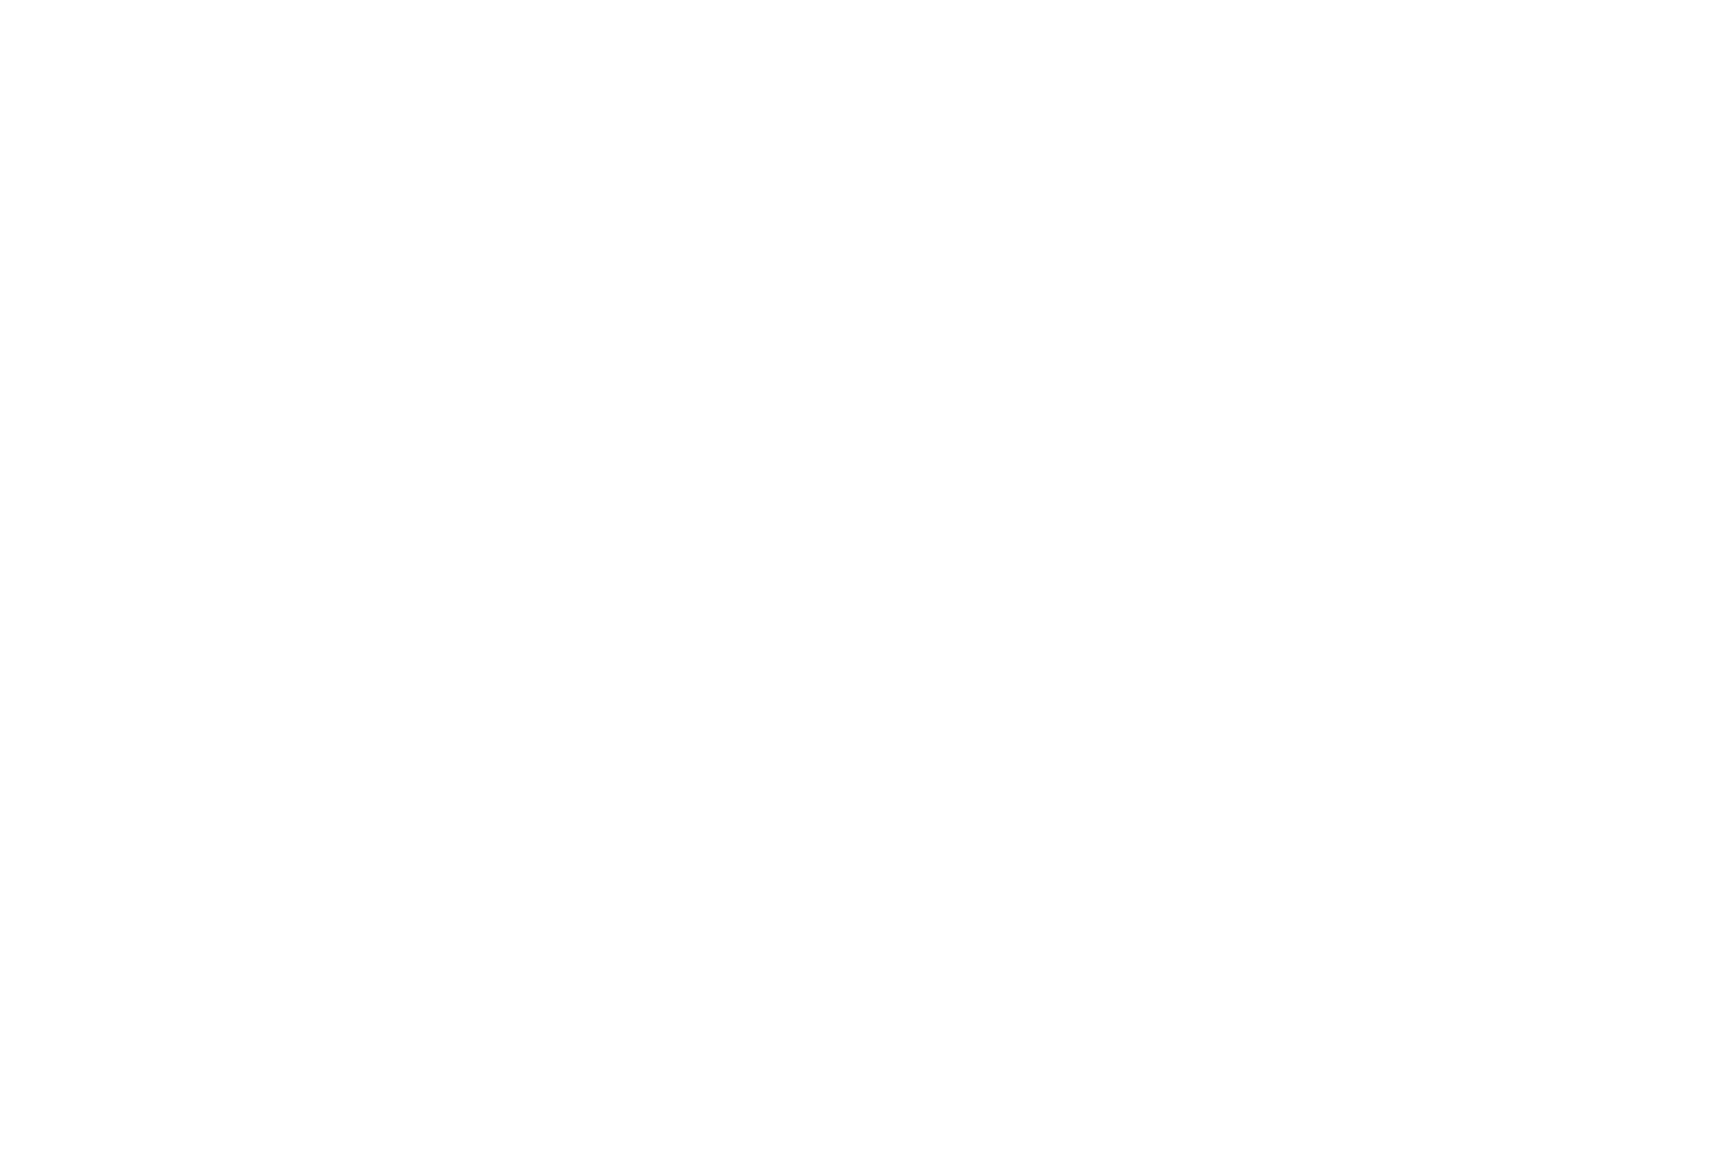 whiteBEST WRITER NOMINEE - Yh Mourhia Wright - GLOW Television  Web Series Festival.png